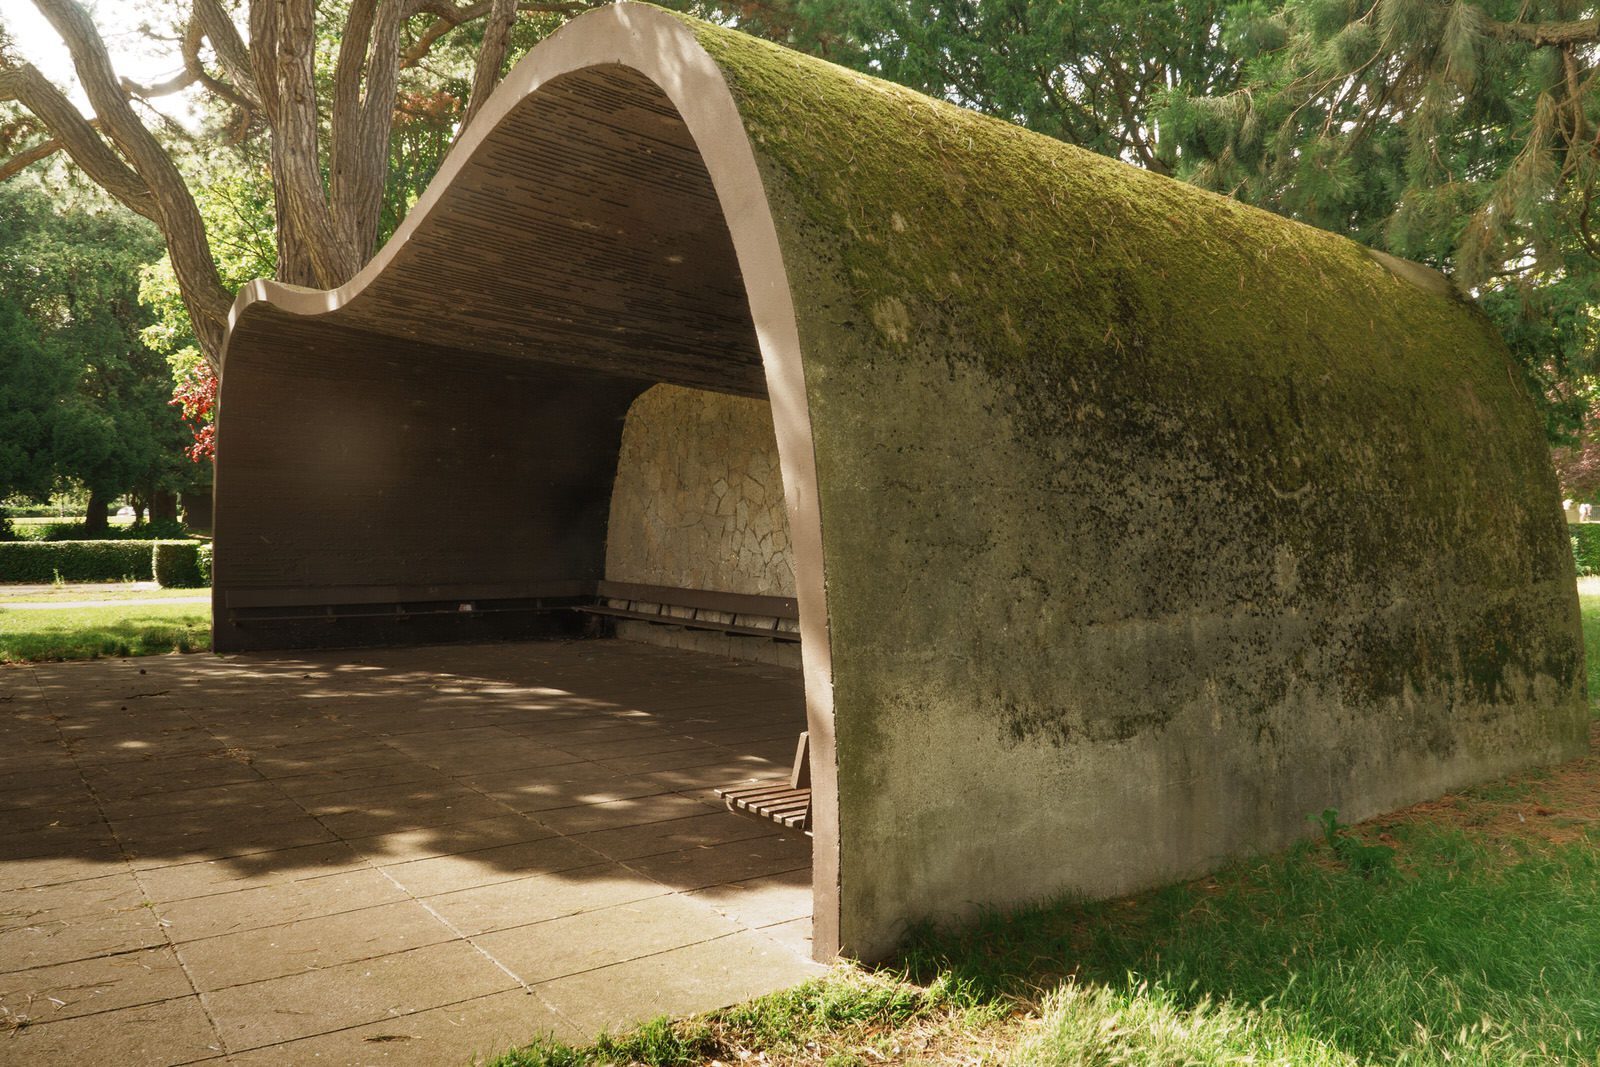 THE CONCRETE SHELTER IN PHOENIX PARK [LOCATED IN THE PEOPLE'S FLOWER GARDENS] 008